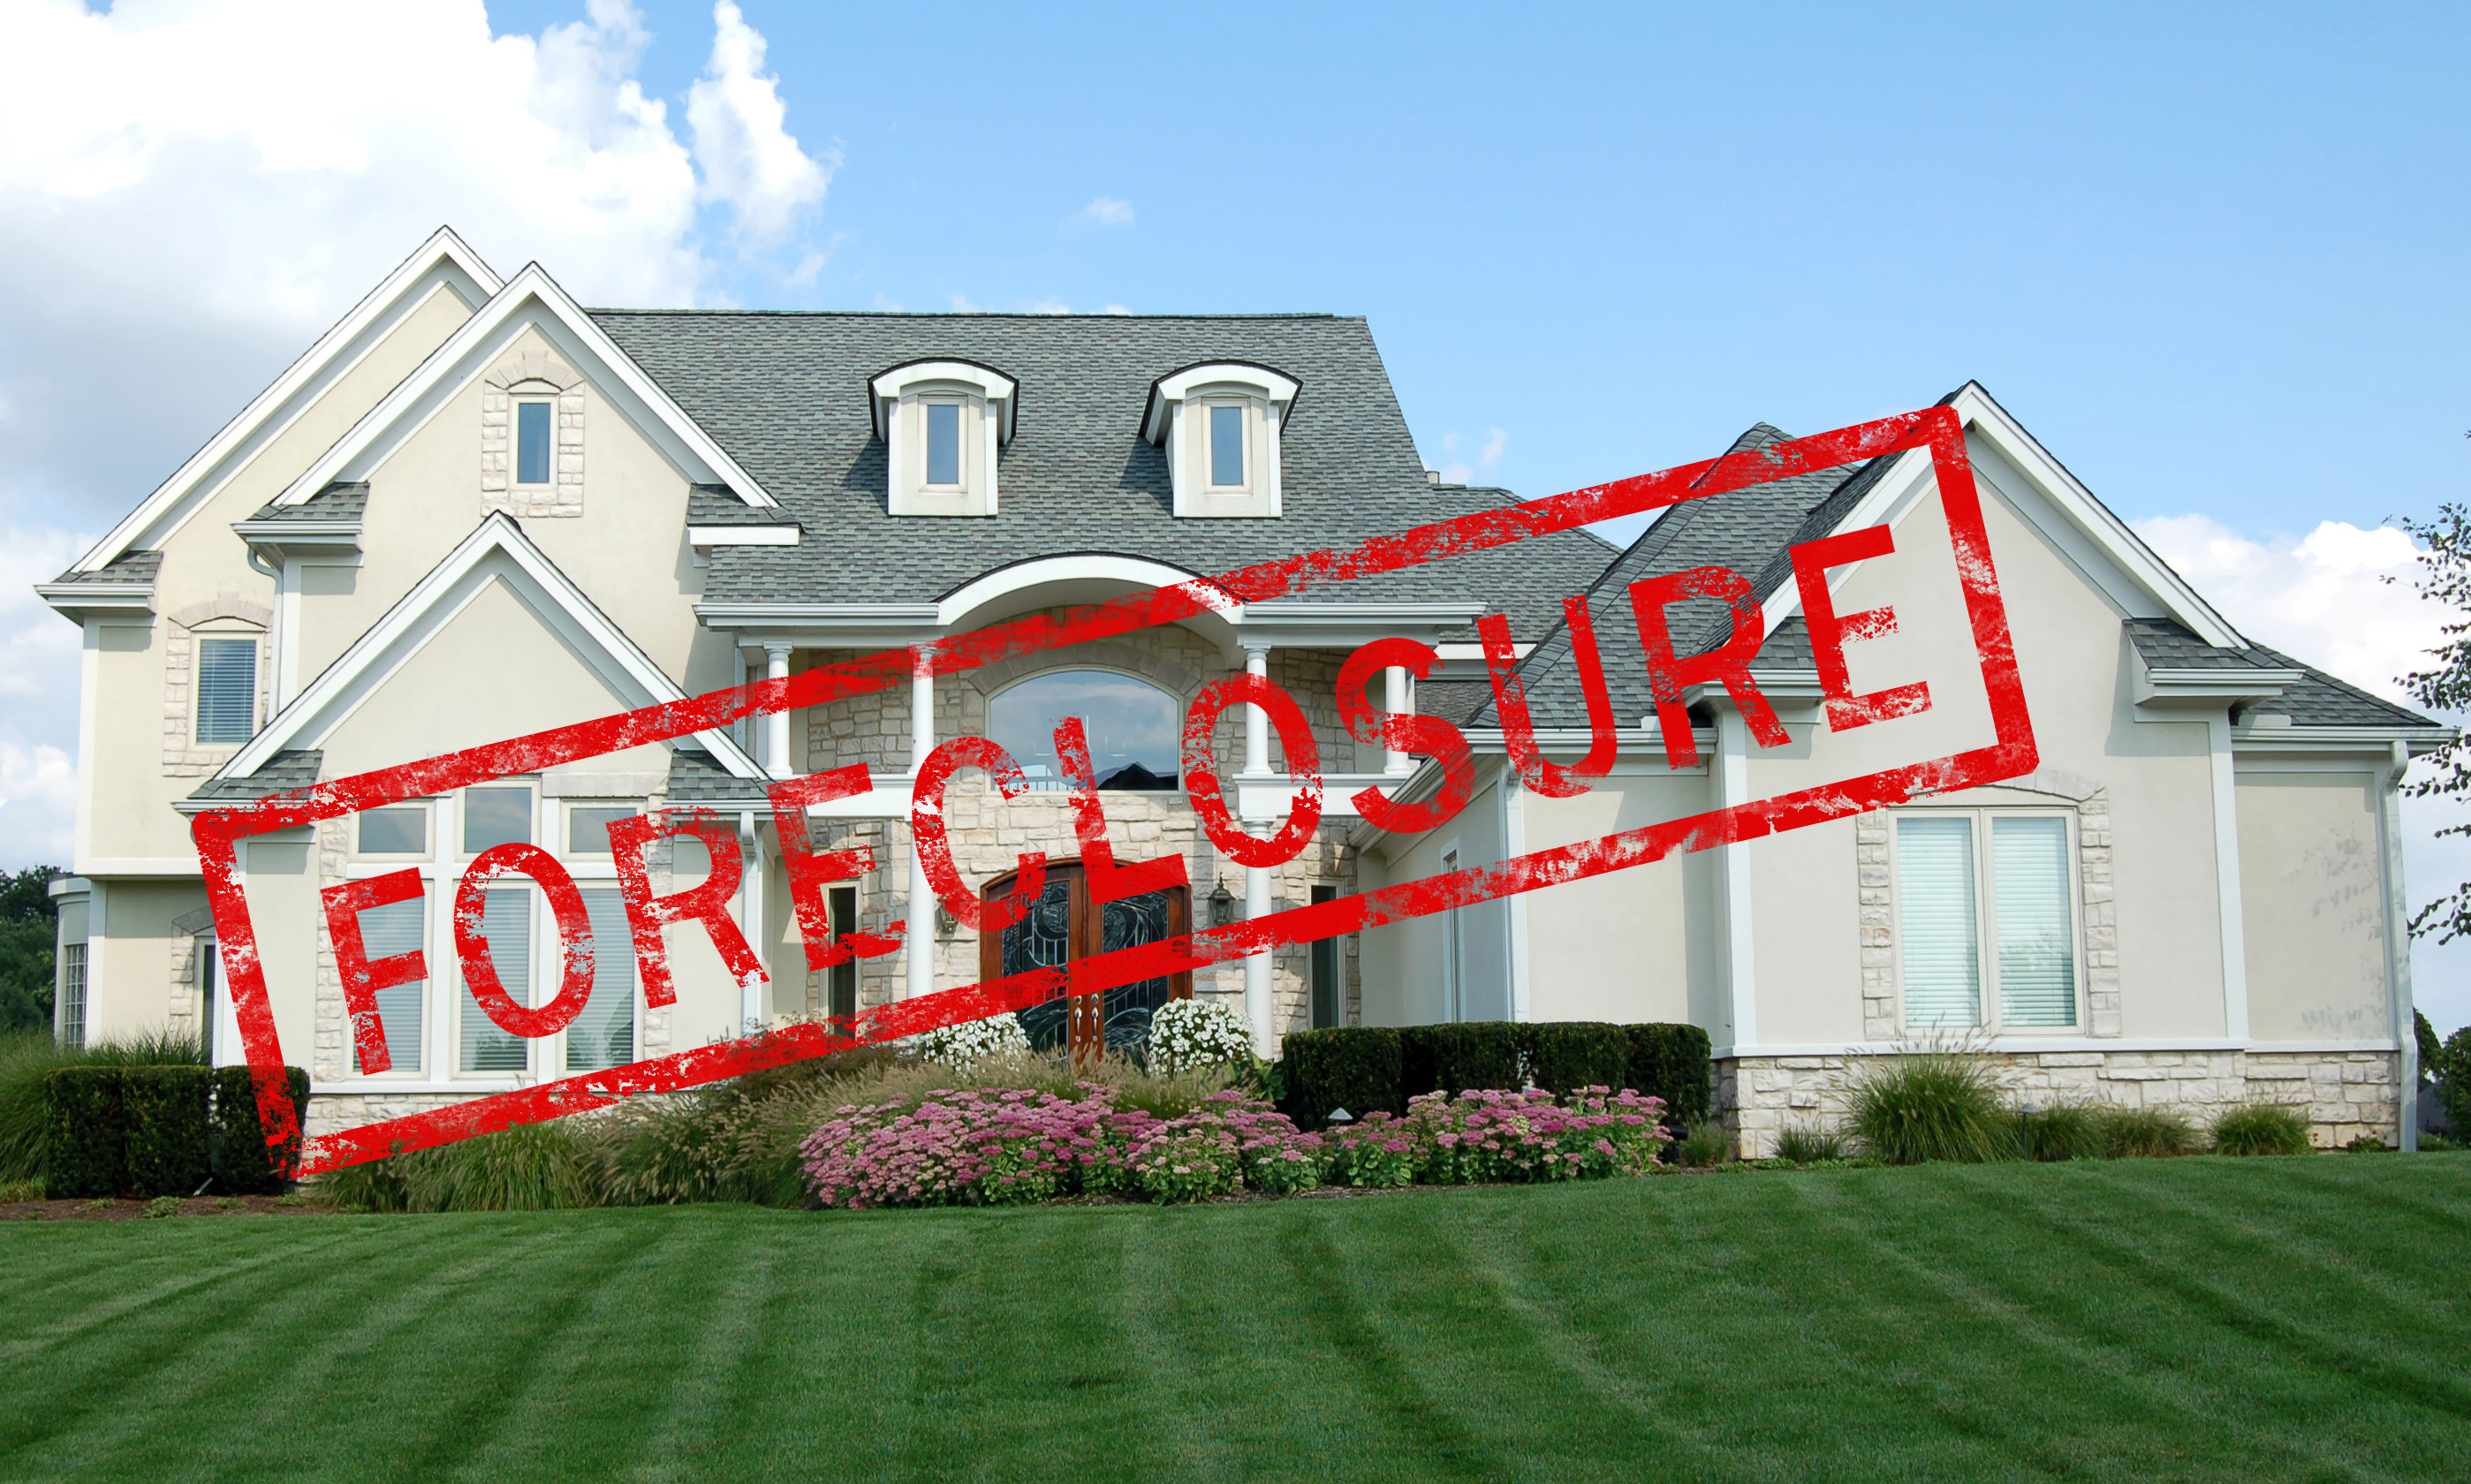 Call Accurate Appraisals of North Carolina when you need appraisals for Pender foreclosures